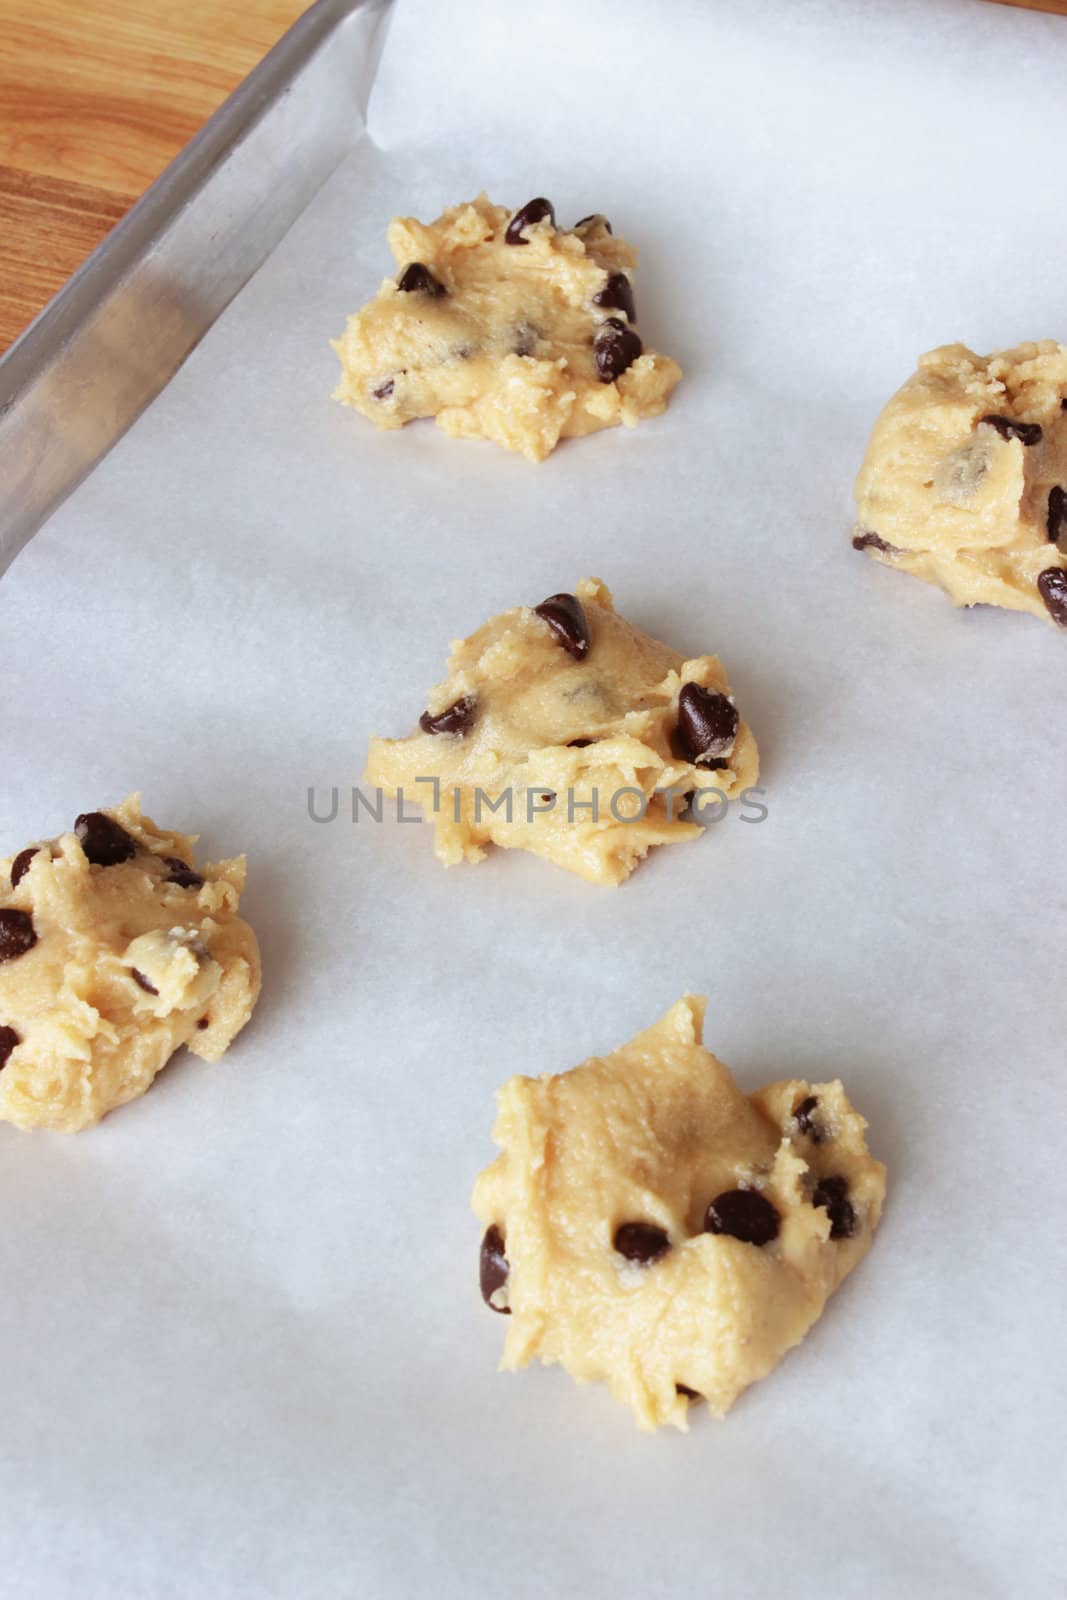 A close-up image of a cookie sheet lined with parchment paper, with chocolate chip cookie dough shaped into cookies, on a wooden counter.